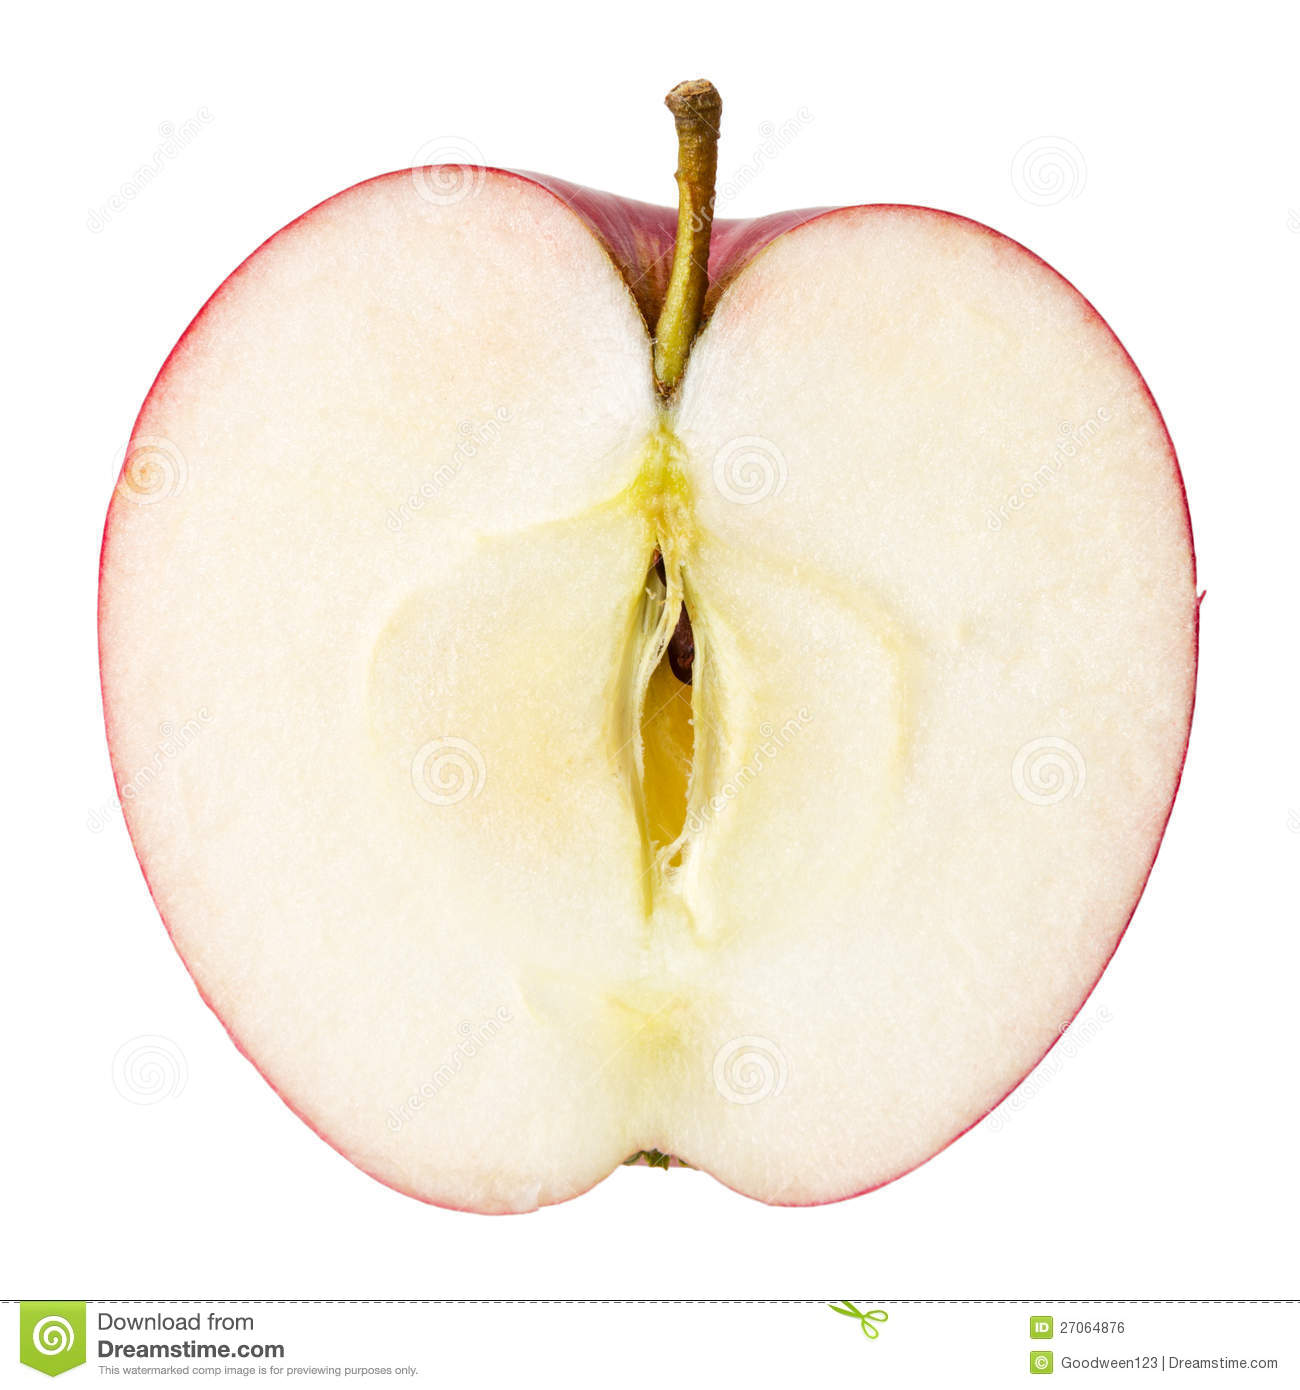 More Similar Stock Images Of   Half Of Red Apple